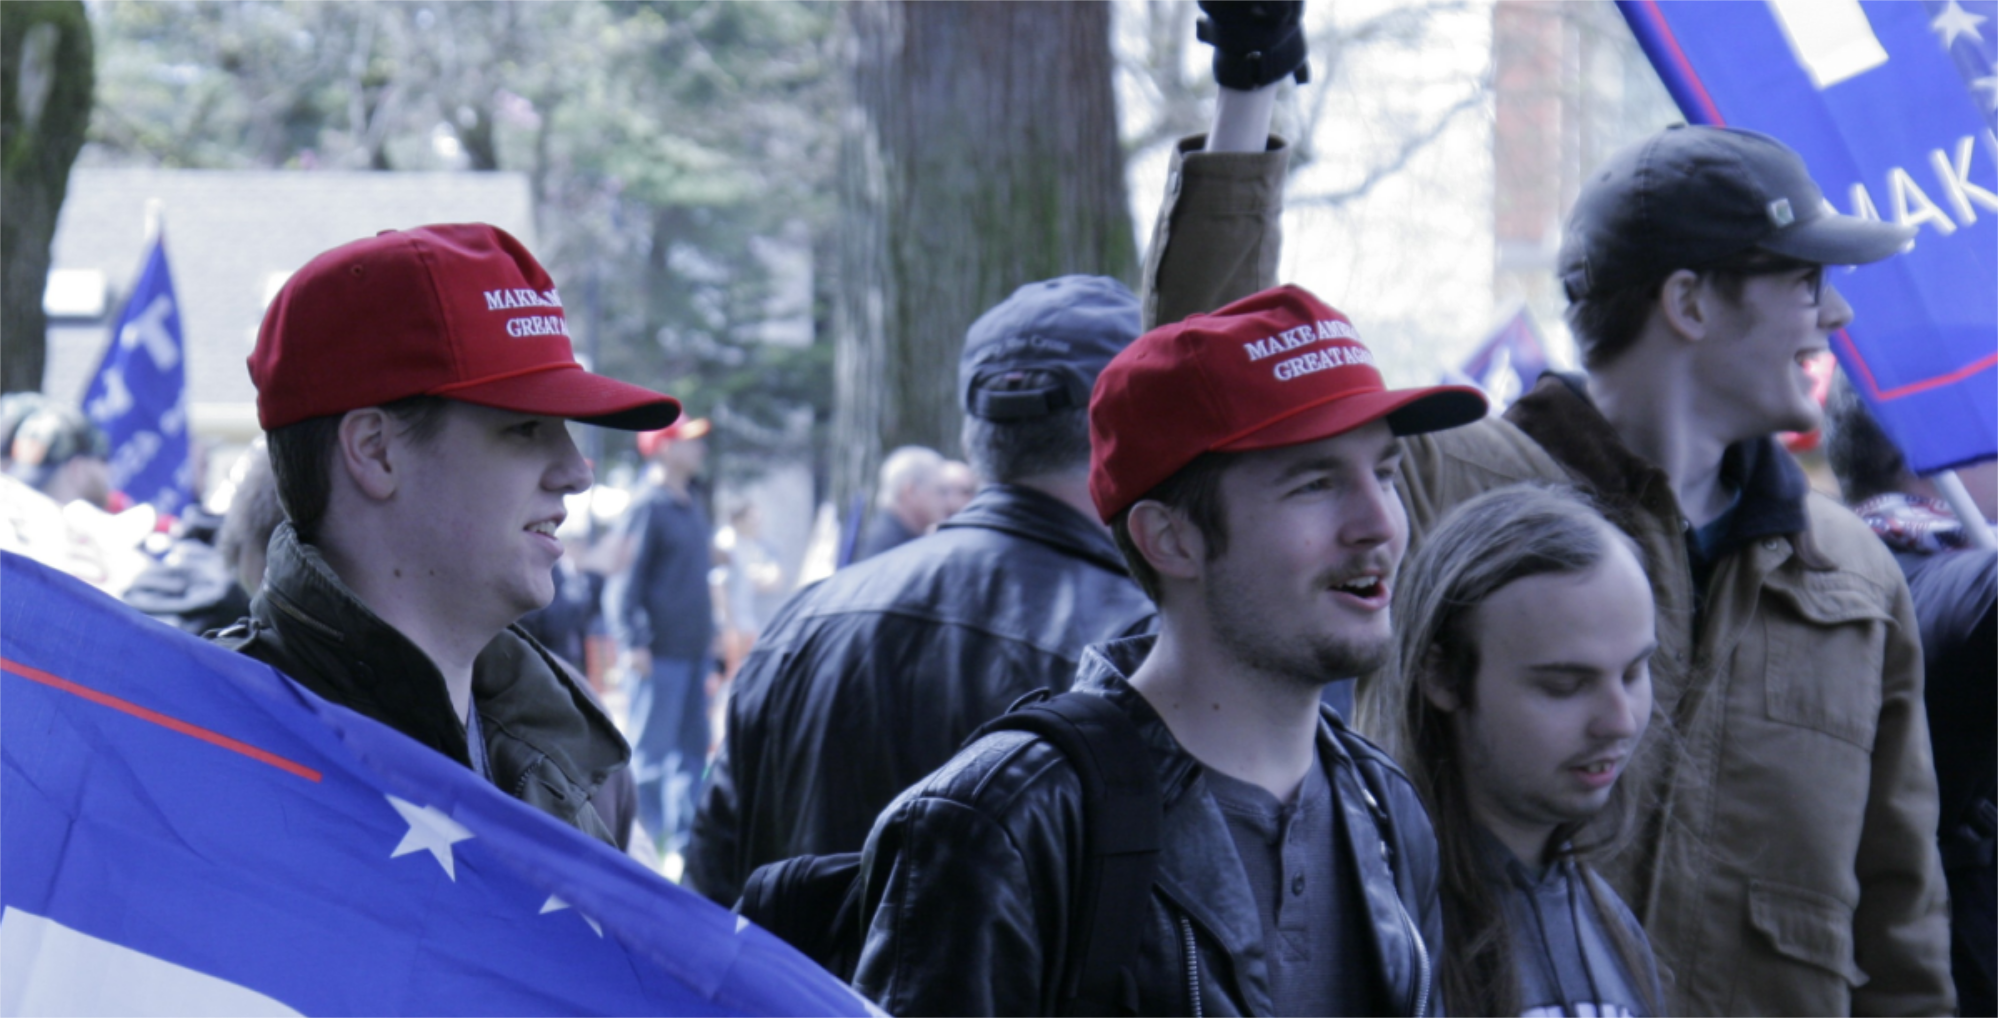 Trump supporters mingled with fascists at rallies in Vancouver and Lake Oswego early in 2017